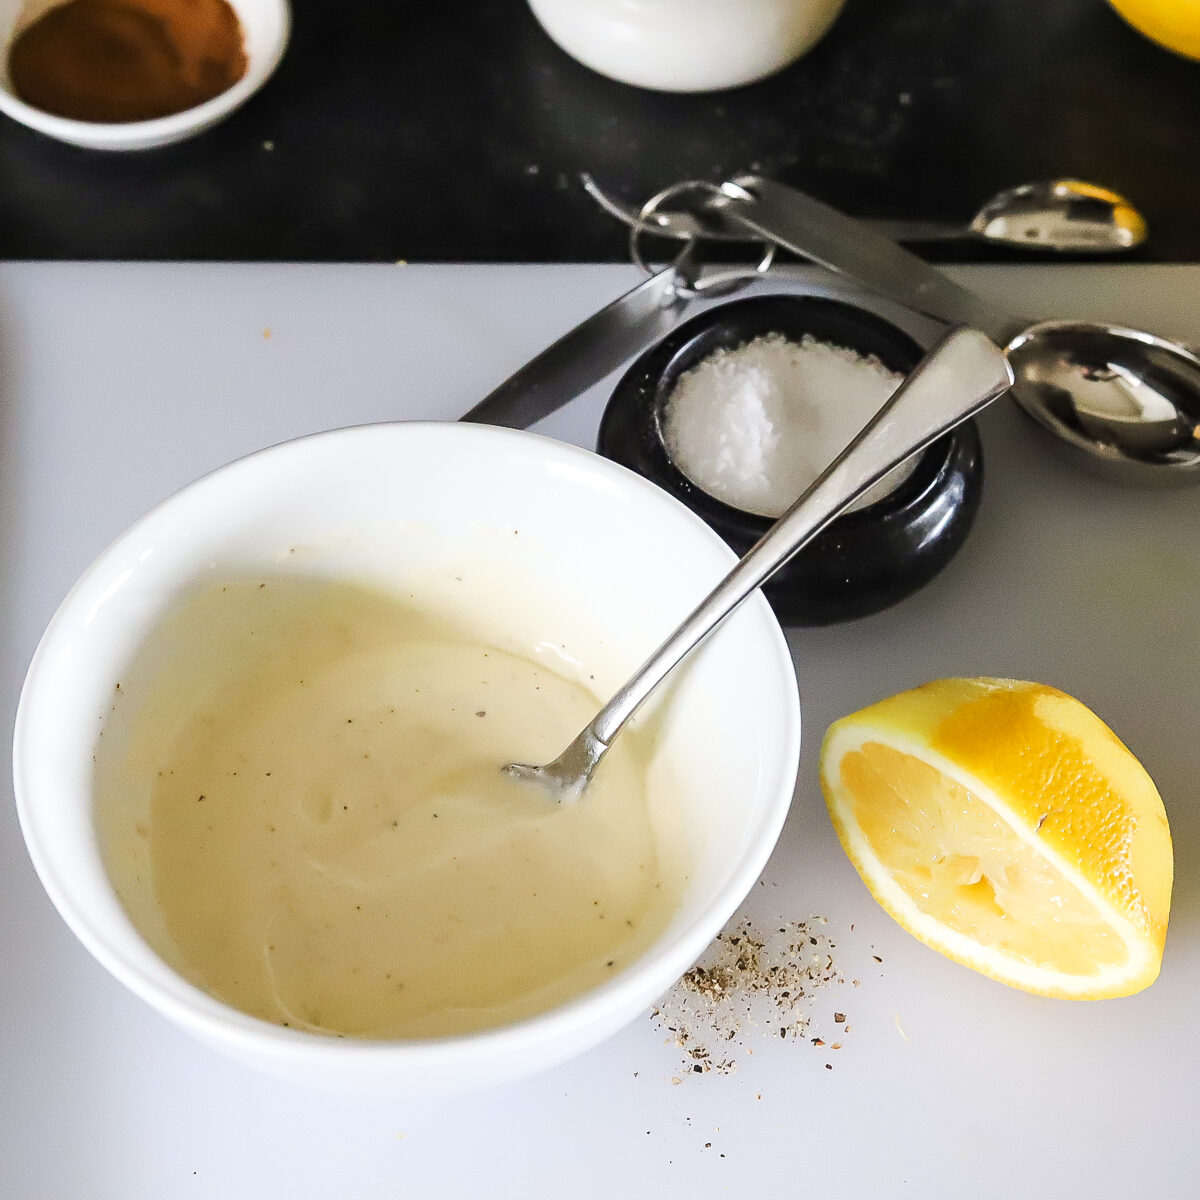 Light yellow creamy sauce in white bowl with used lemon half beside it and salt in the background.